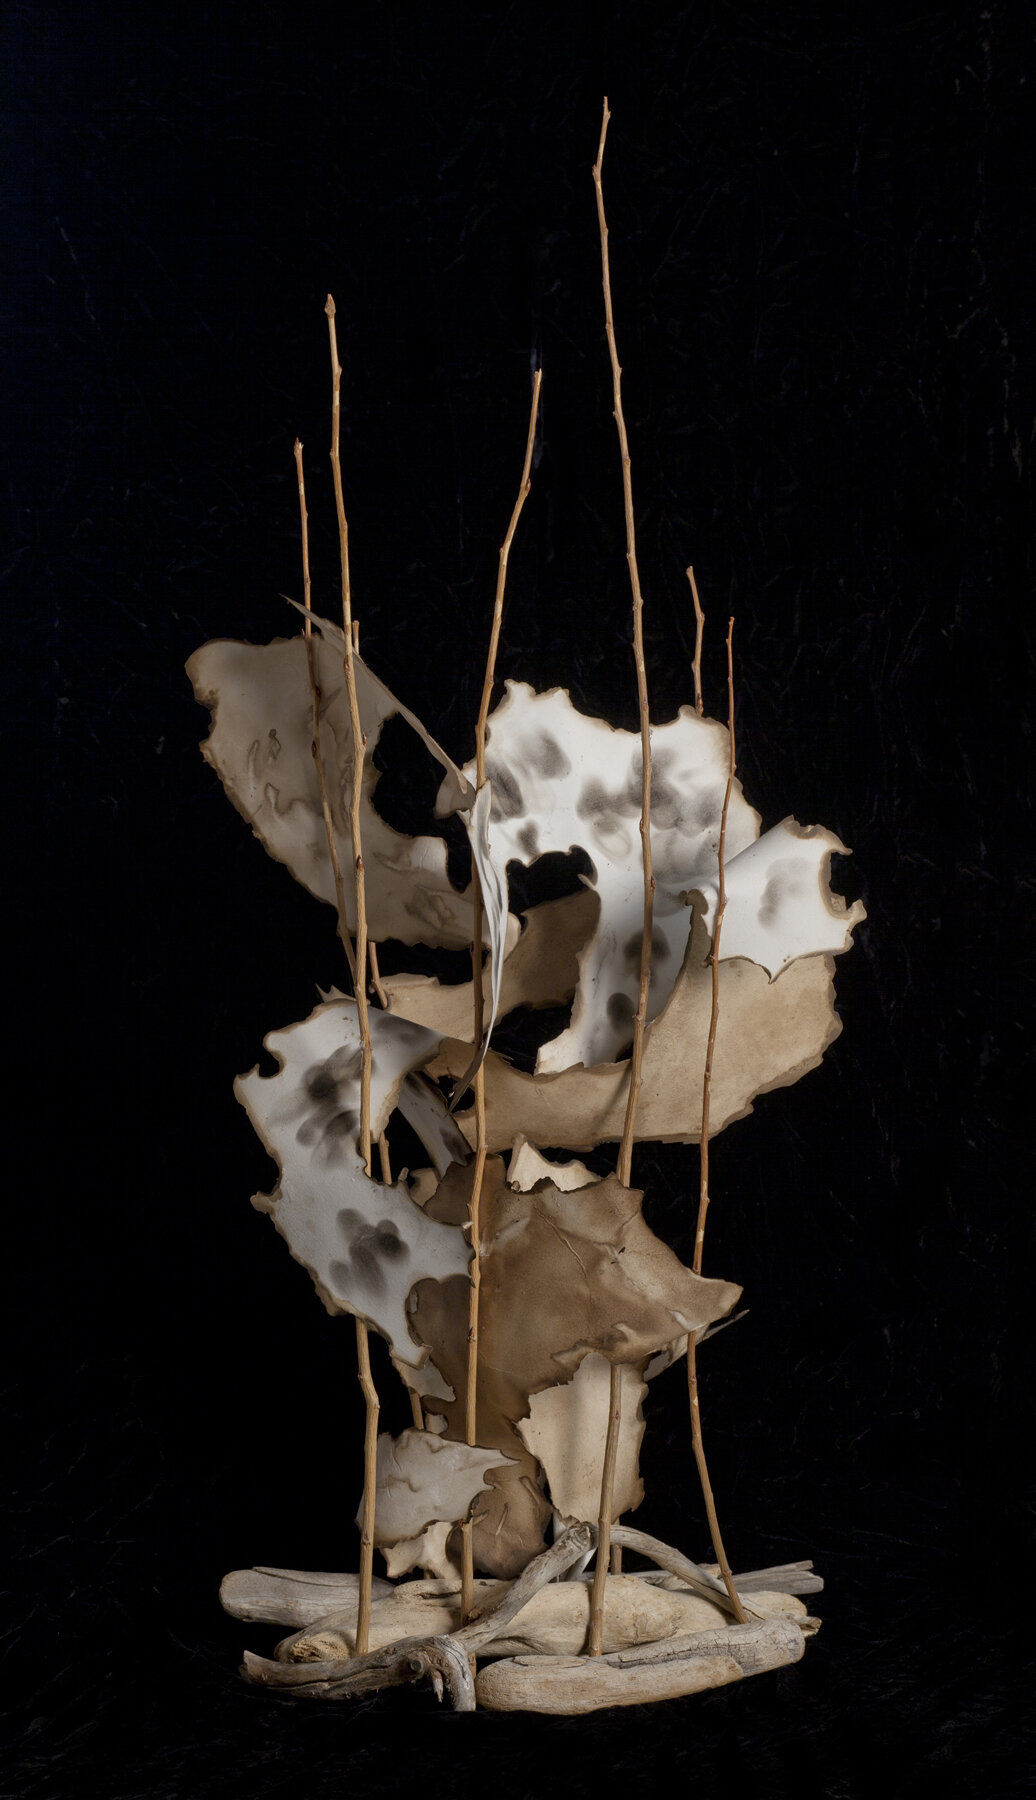    Voyage 10   wood, twigs, burnt paper, 36 x 15 x 12 inches&nbsp; 